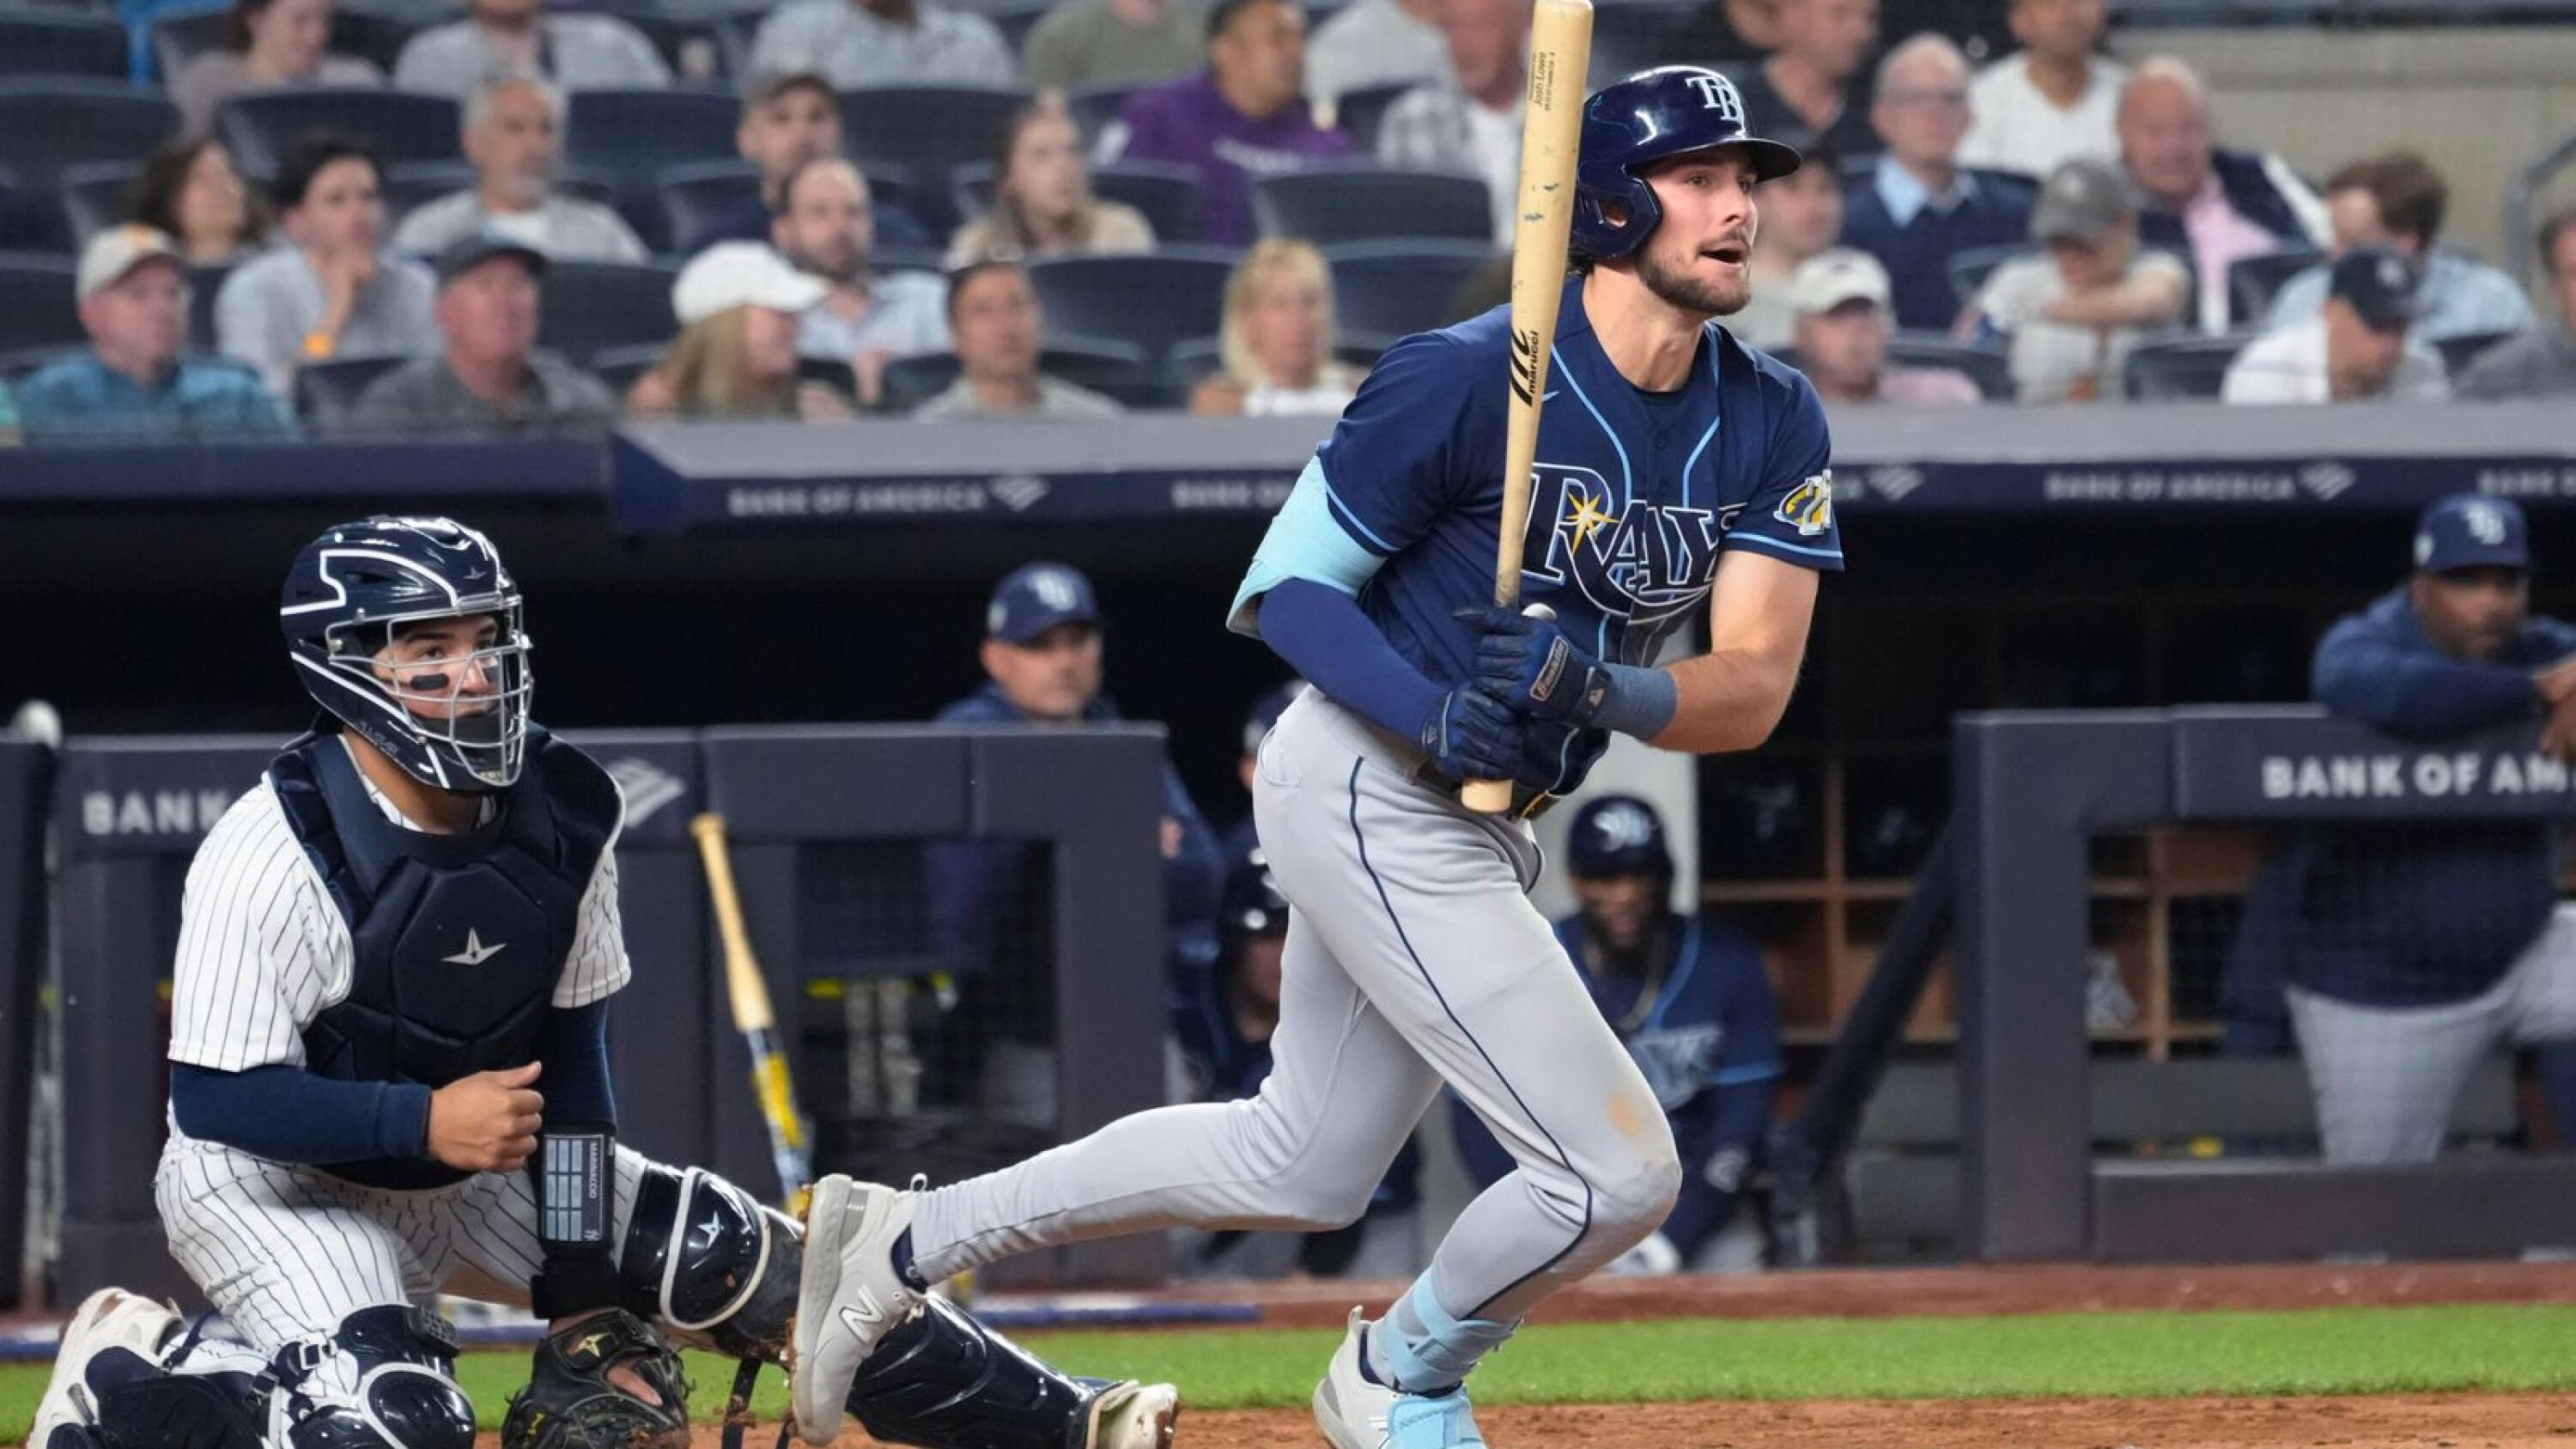 Rays improve to 30-9 after beating Yankees 8-2 behind Lowe's 5 RBIs